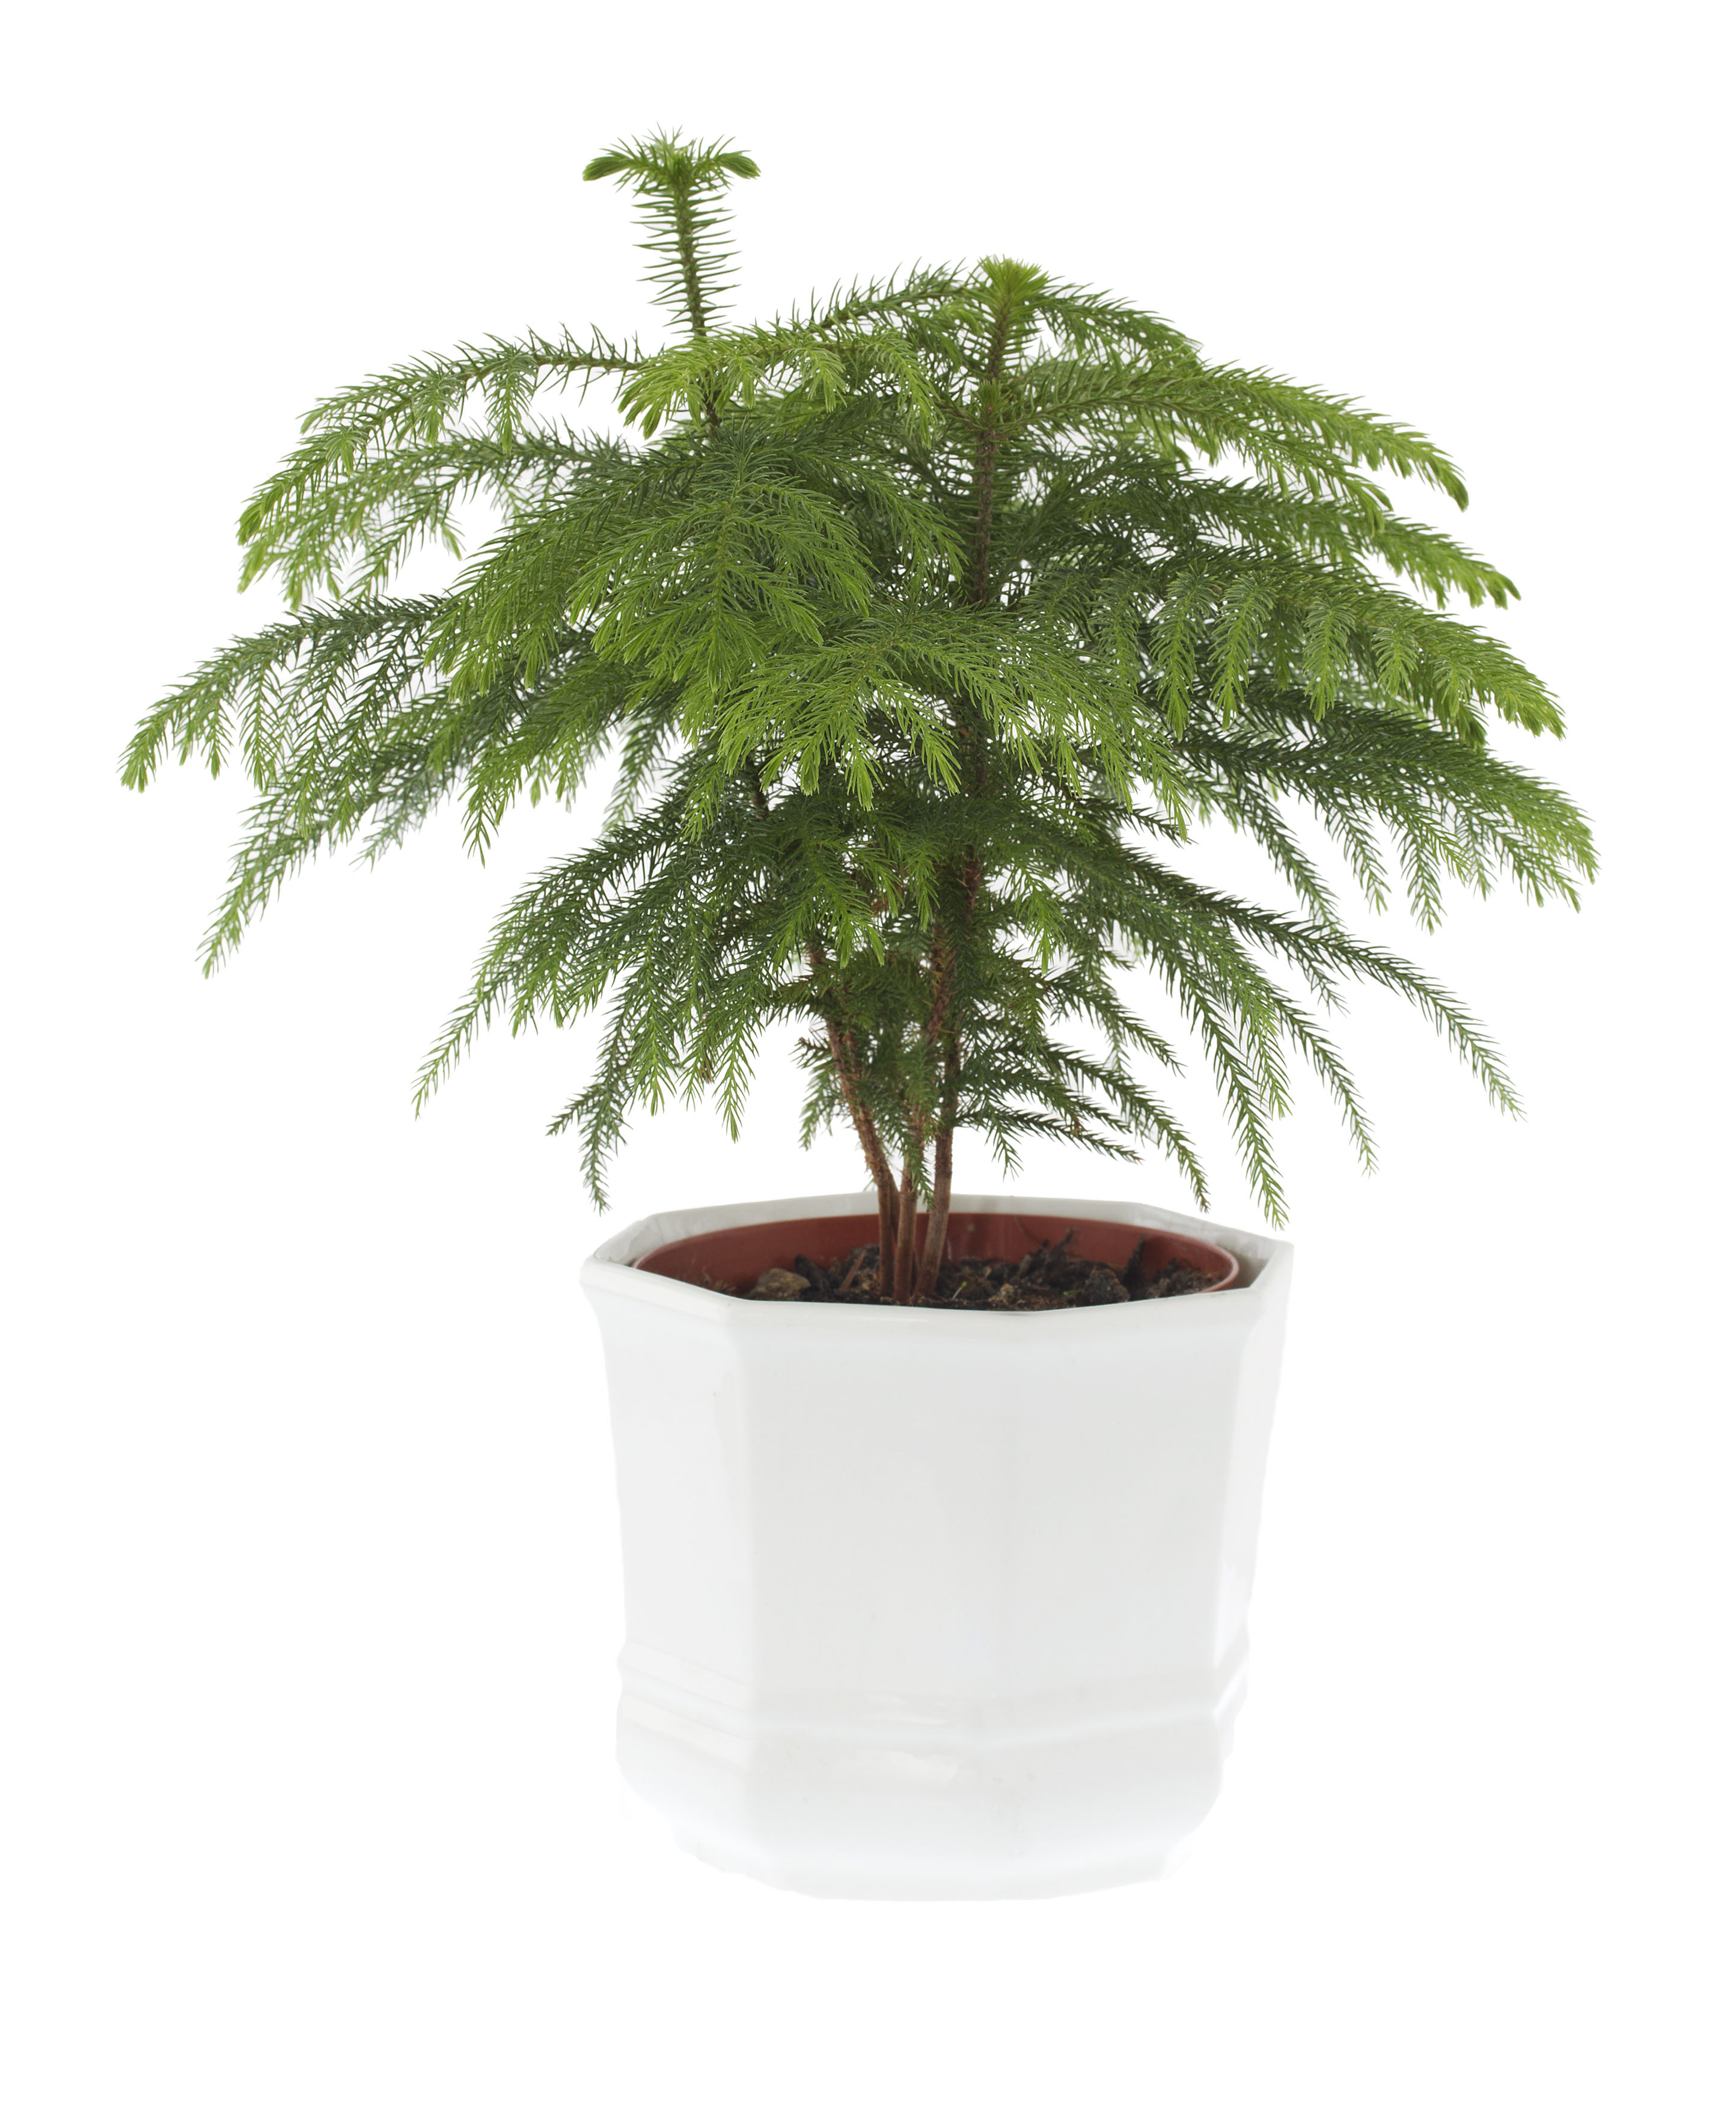 A Norfolk Island pine in a white pot on a white background